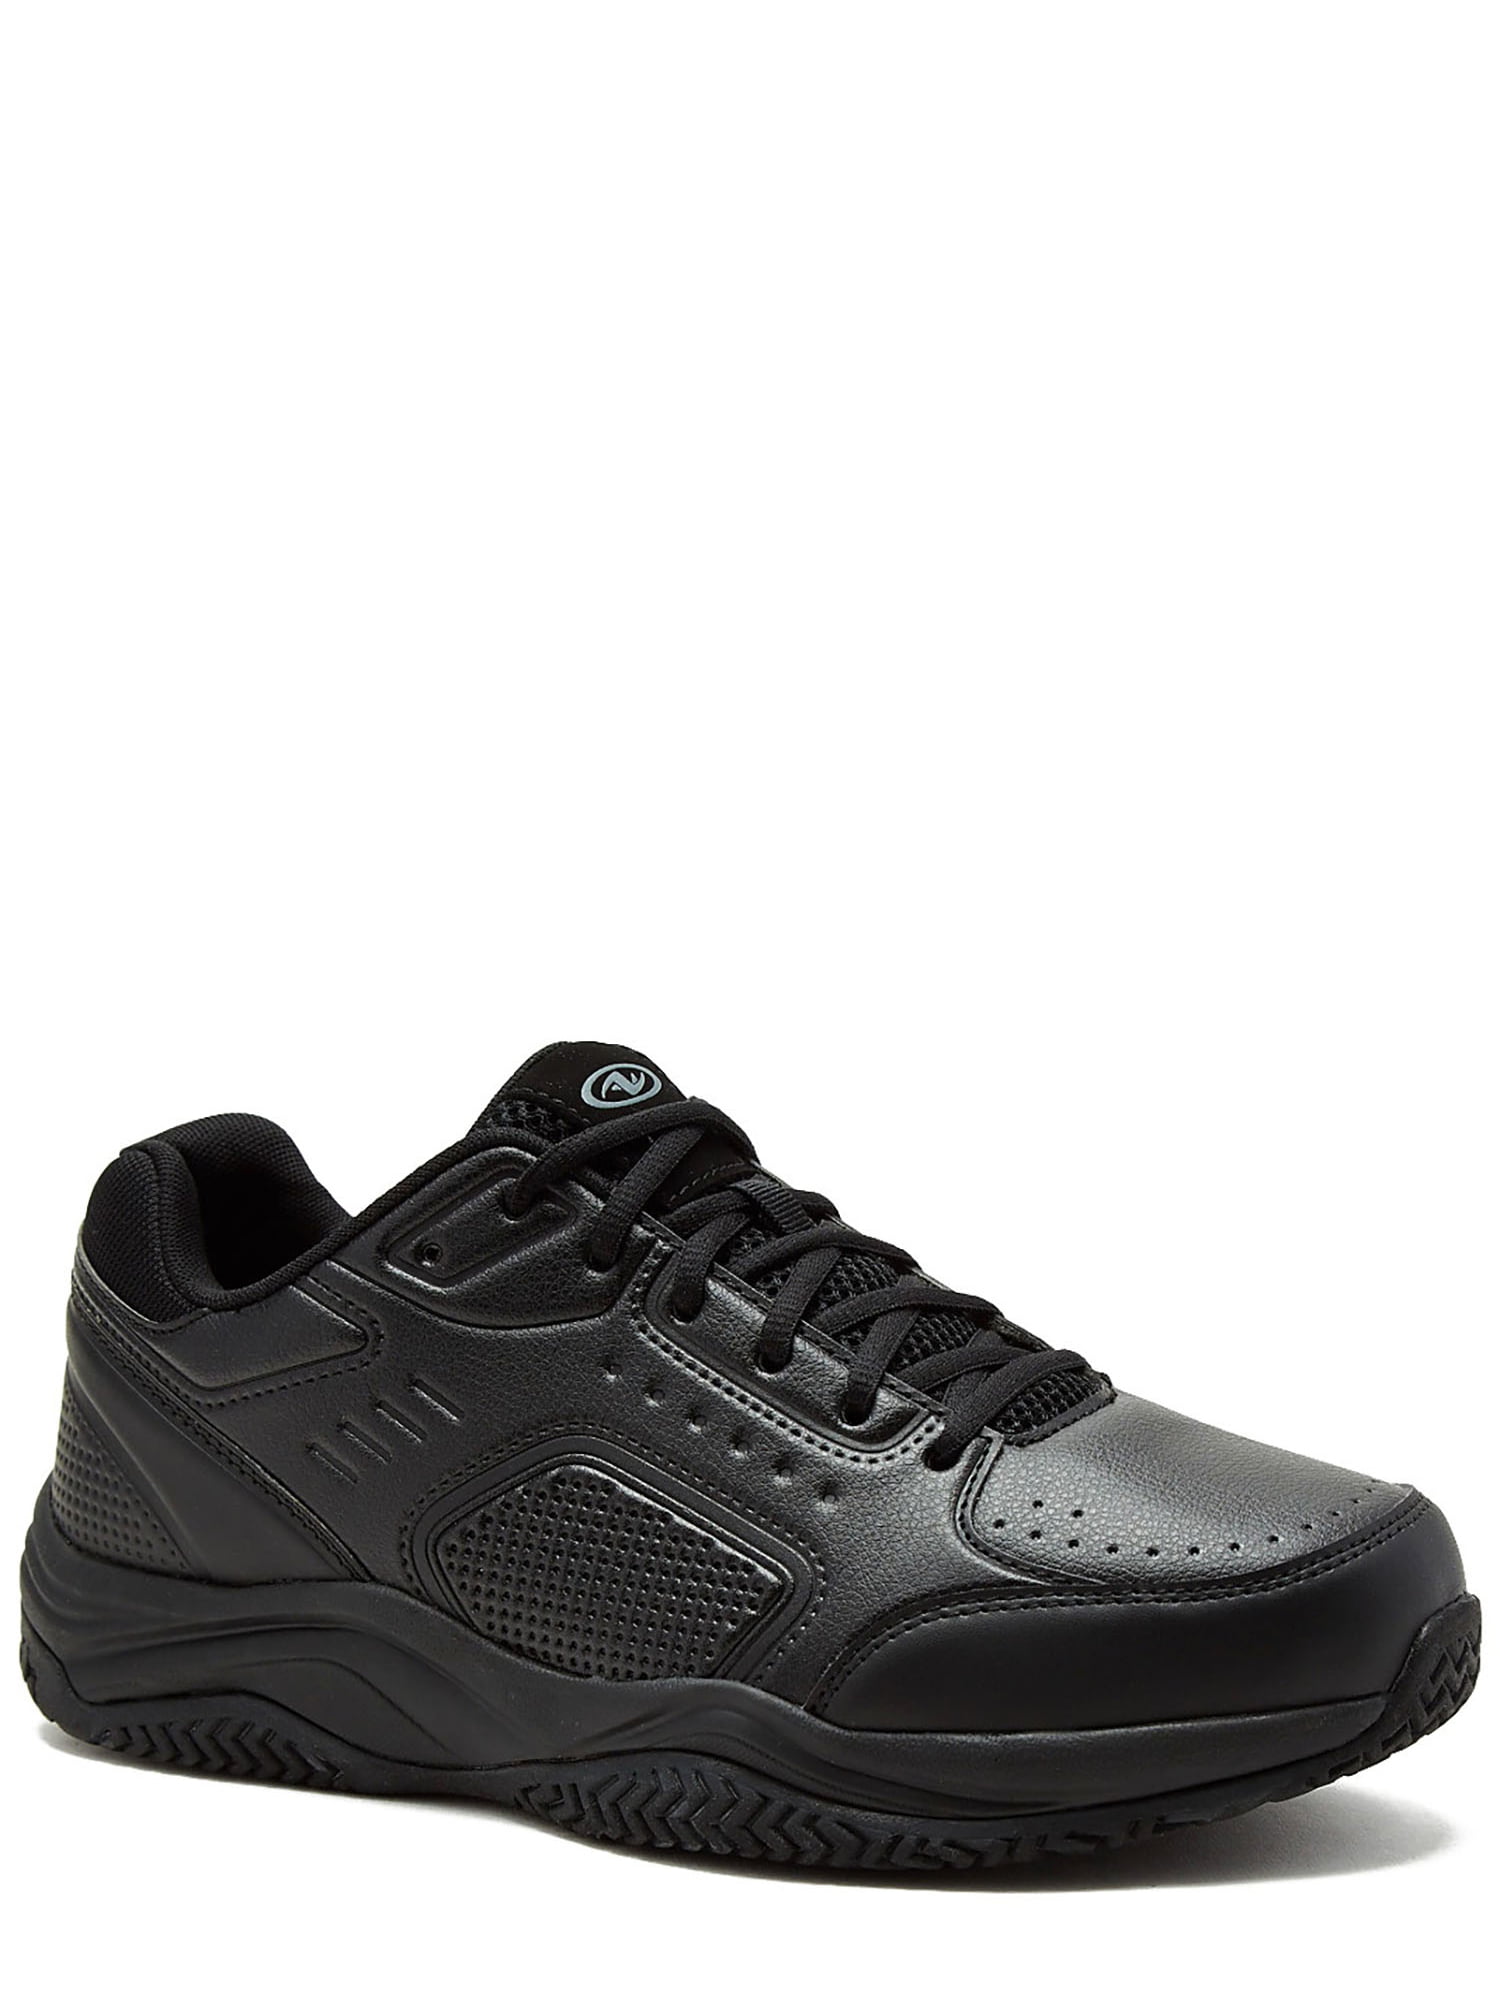 Front Runner Wide Width Athletic Shoe 